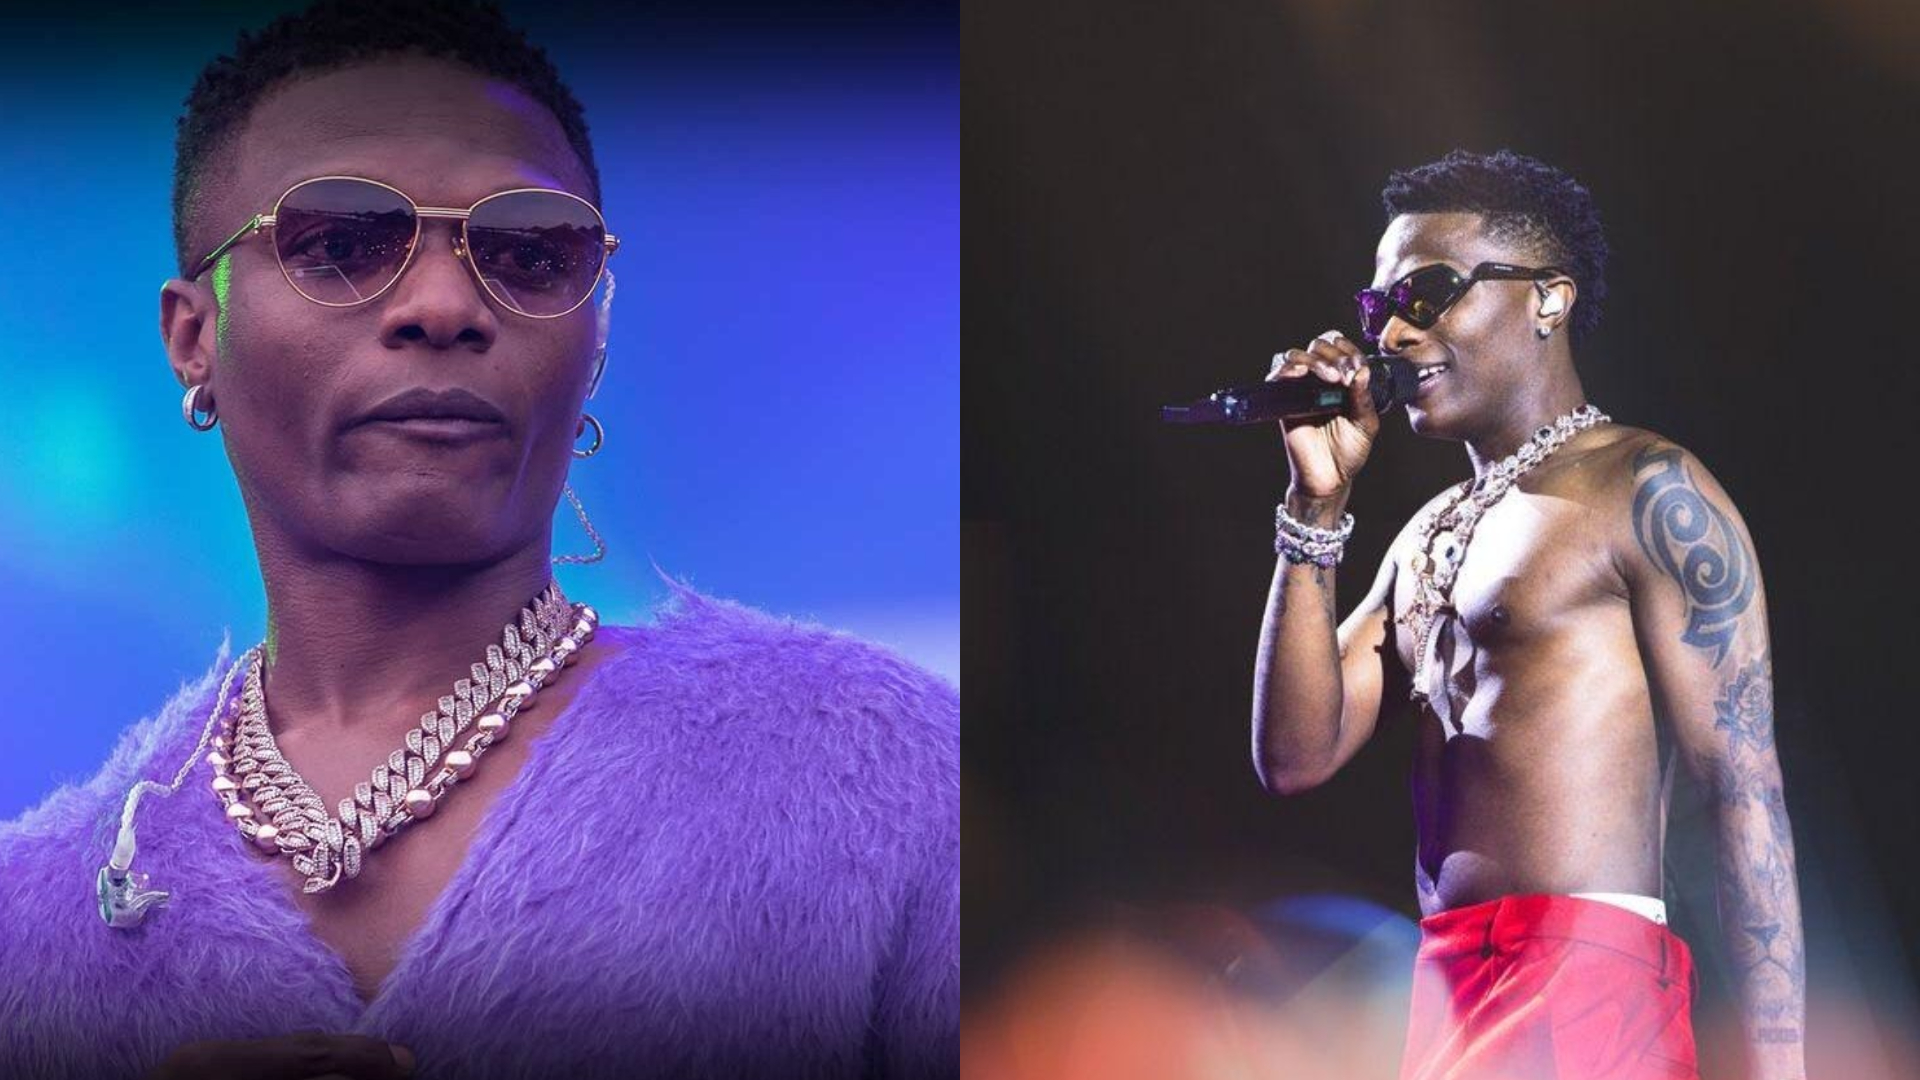 Renowned Afrobeats star, Wizkid has set many reactions after he mistakenly threw his ring, said to be worth £100K, to the crowd during a performance.